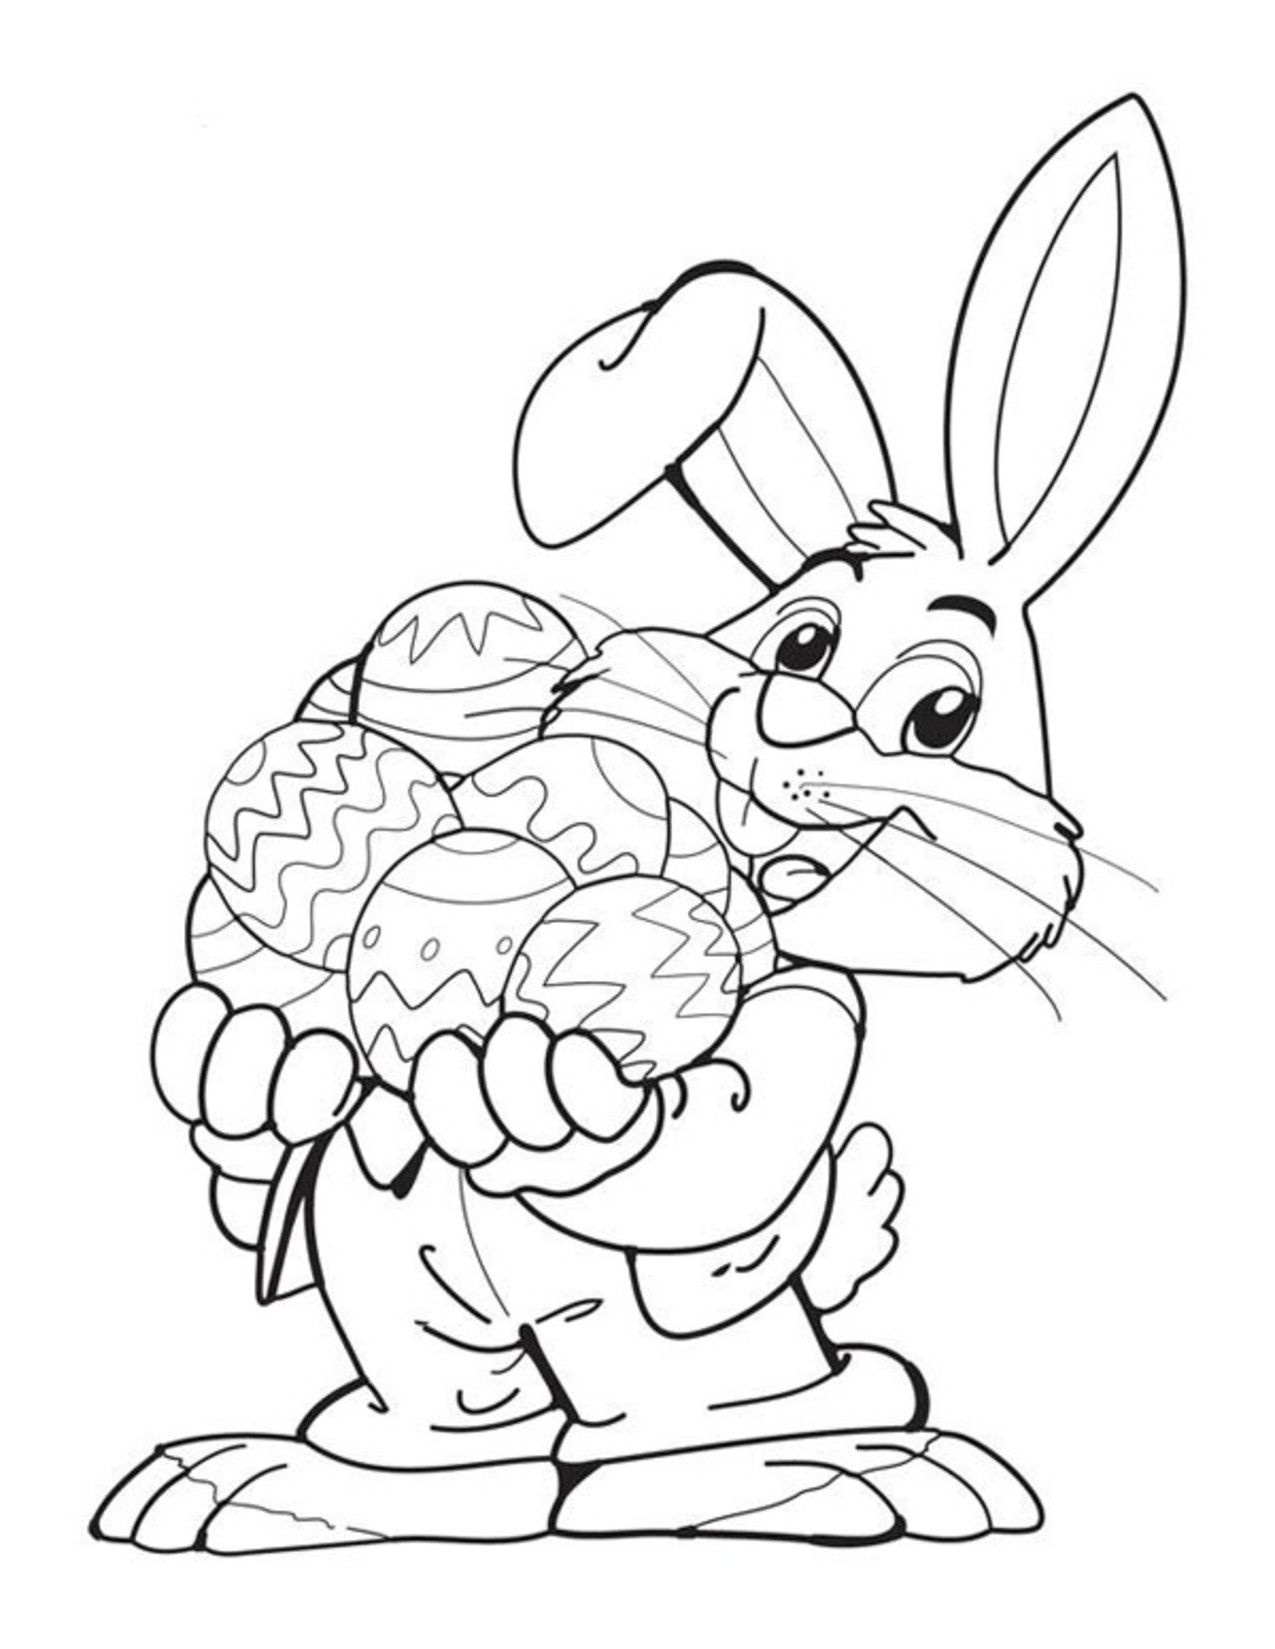 Printable Easter Coloring Pages For Preschoolers Adults Mandala - Easter Coloring Pages Free Printable